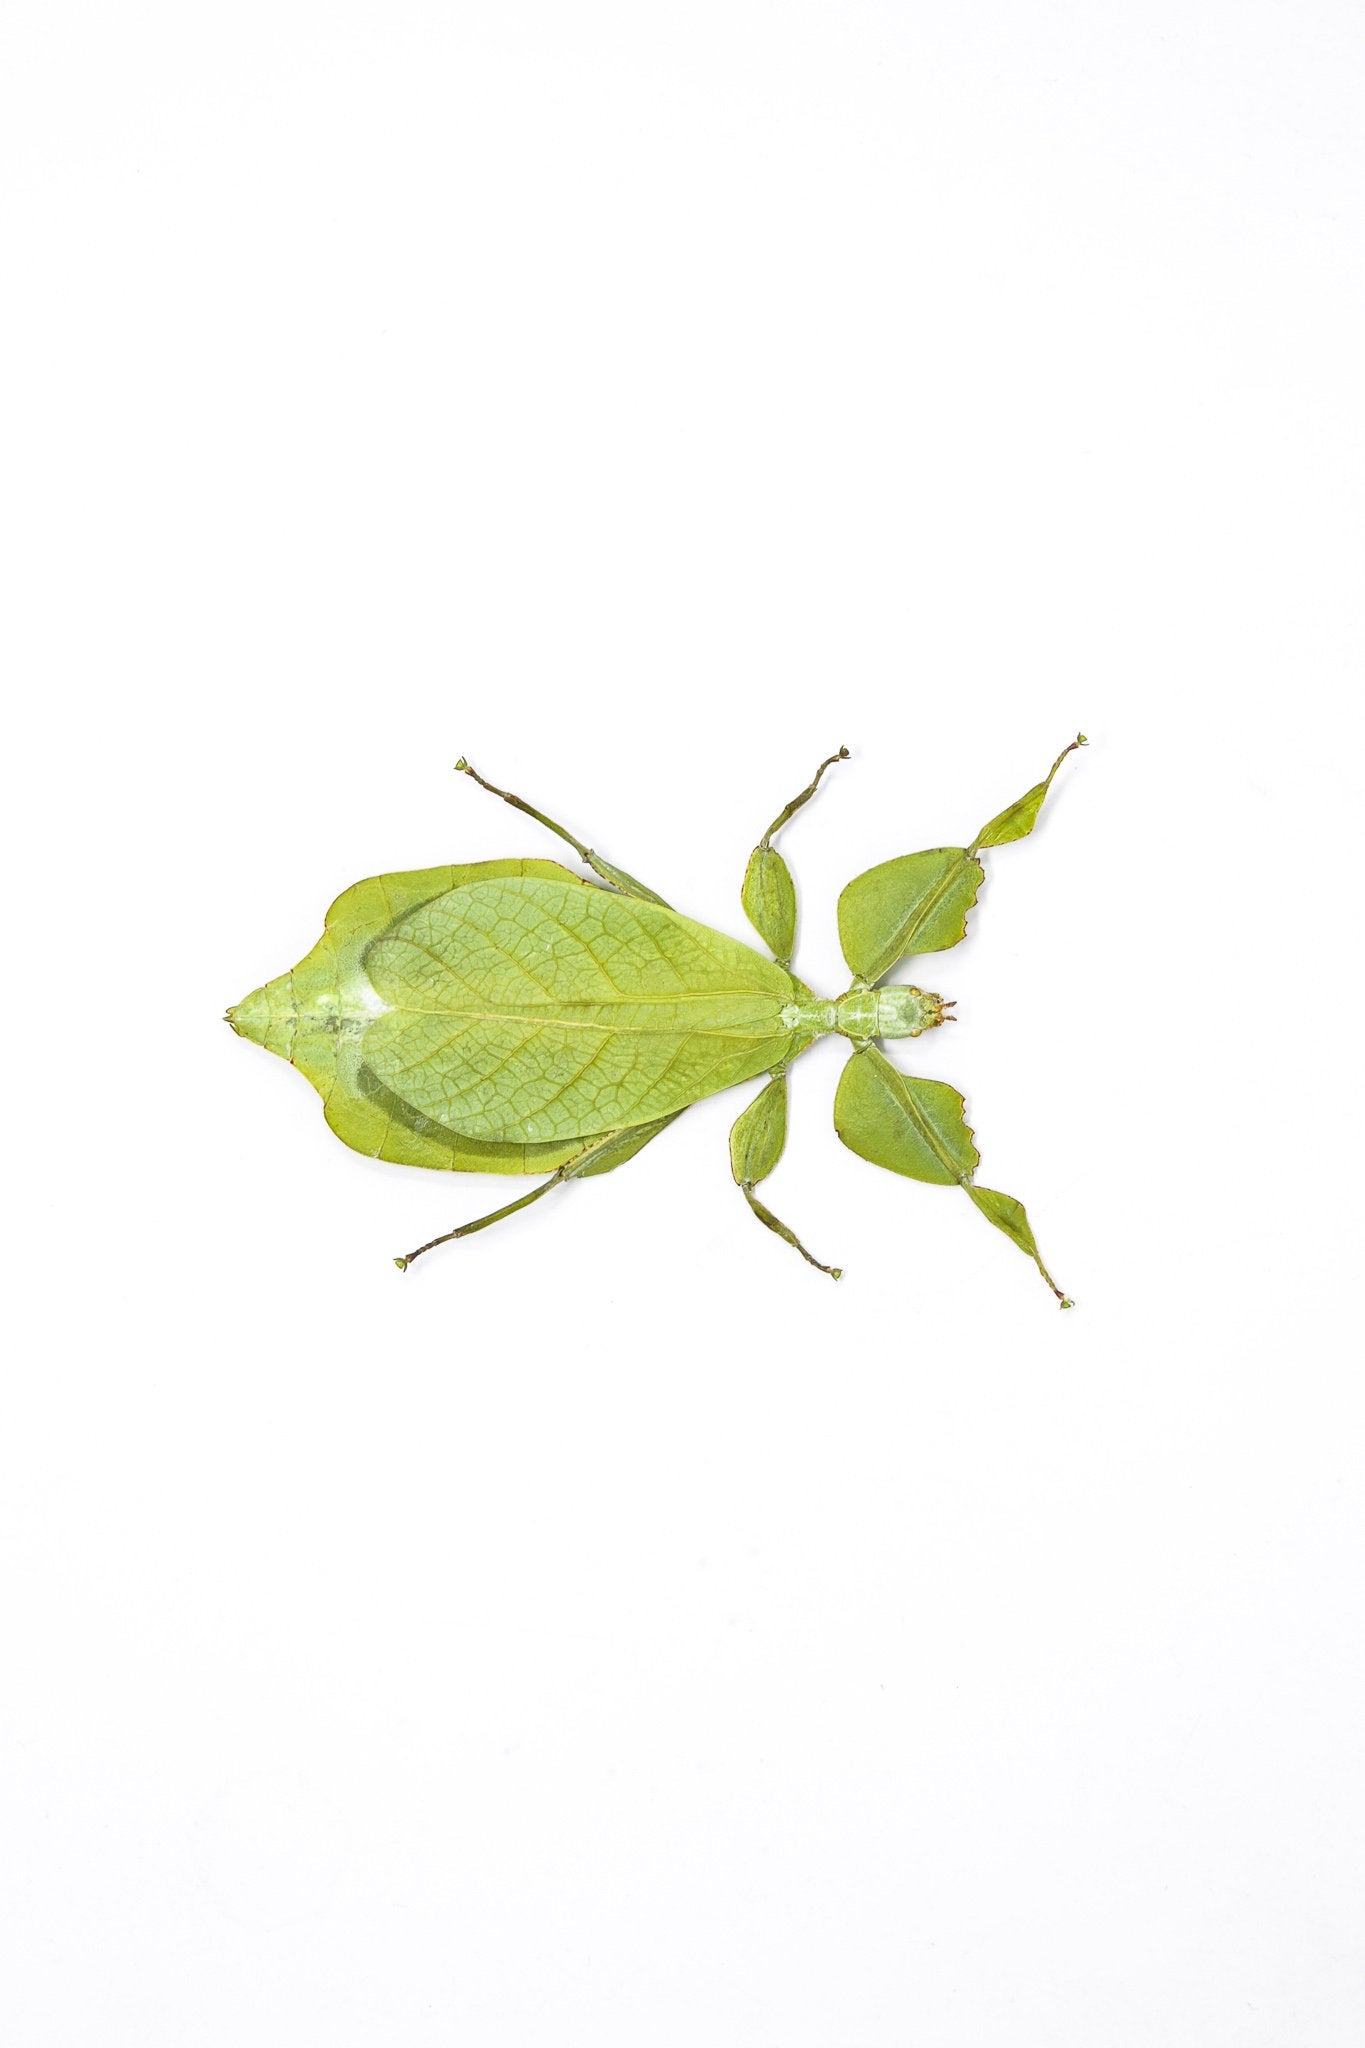 Two (2) Giant Leaf Insects, Phyllium celebicum, Unmounted Spread Specimens